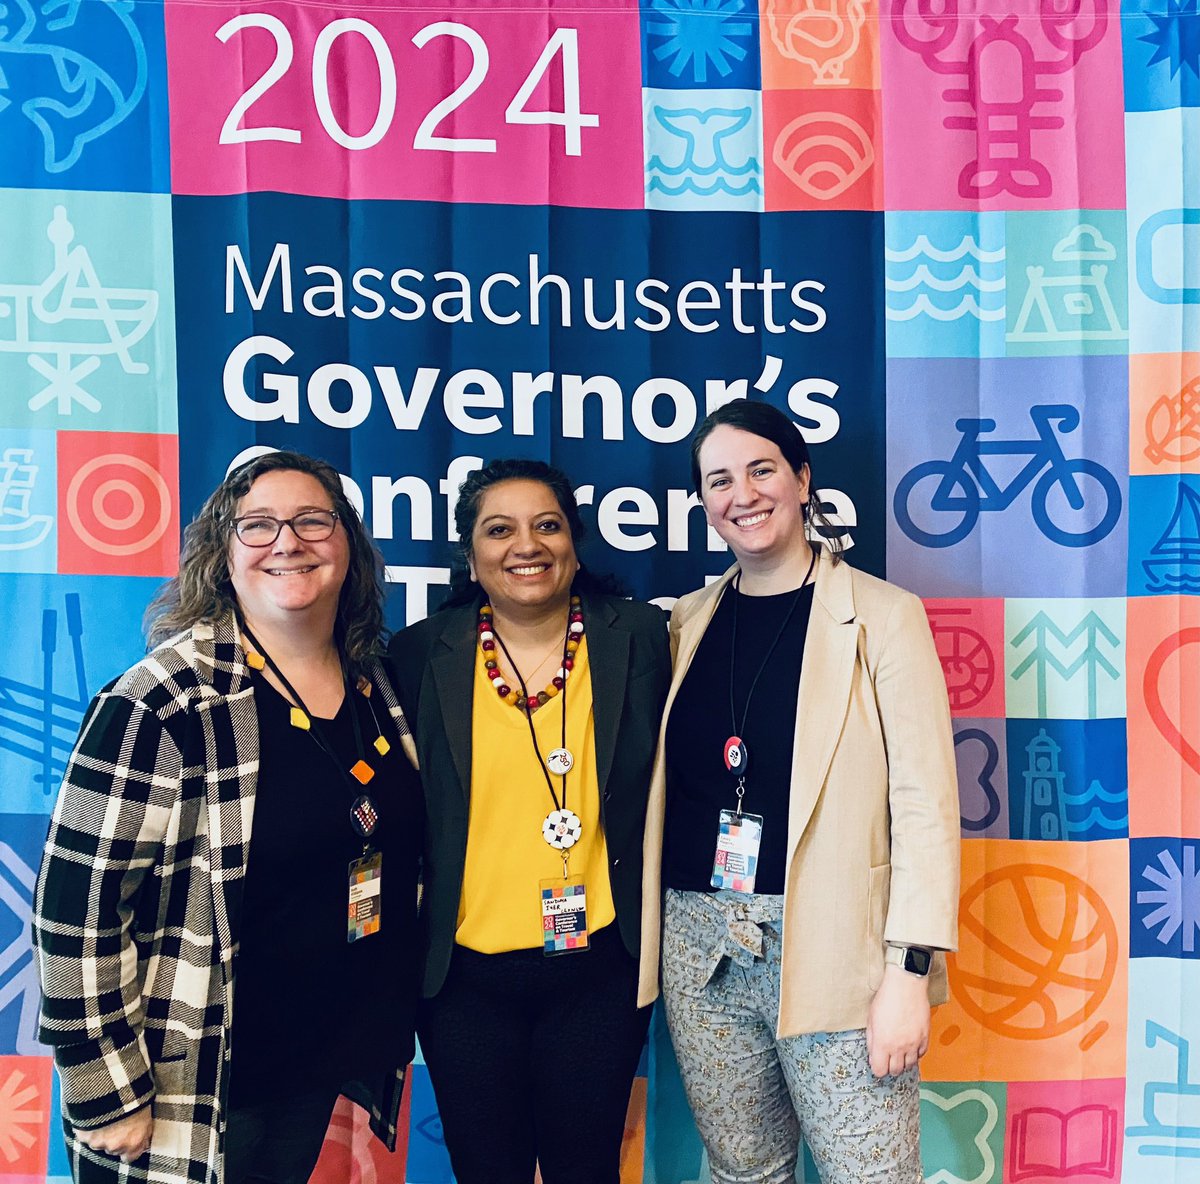 Buzzing with energy and enthusiasm- the #MAGovConf2024. Look forward to collaborating with @VisitMA 250.MA @TownOfLexMA @Lexington250 @Concord250 @America250 @arlcc @MerrimackValley @VisitNorthOfBos @WoburnEconDev